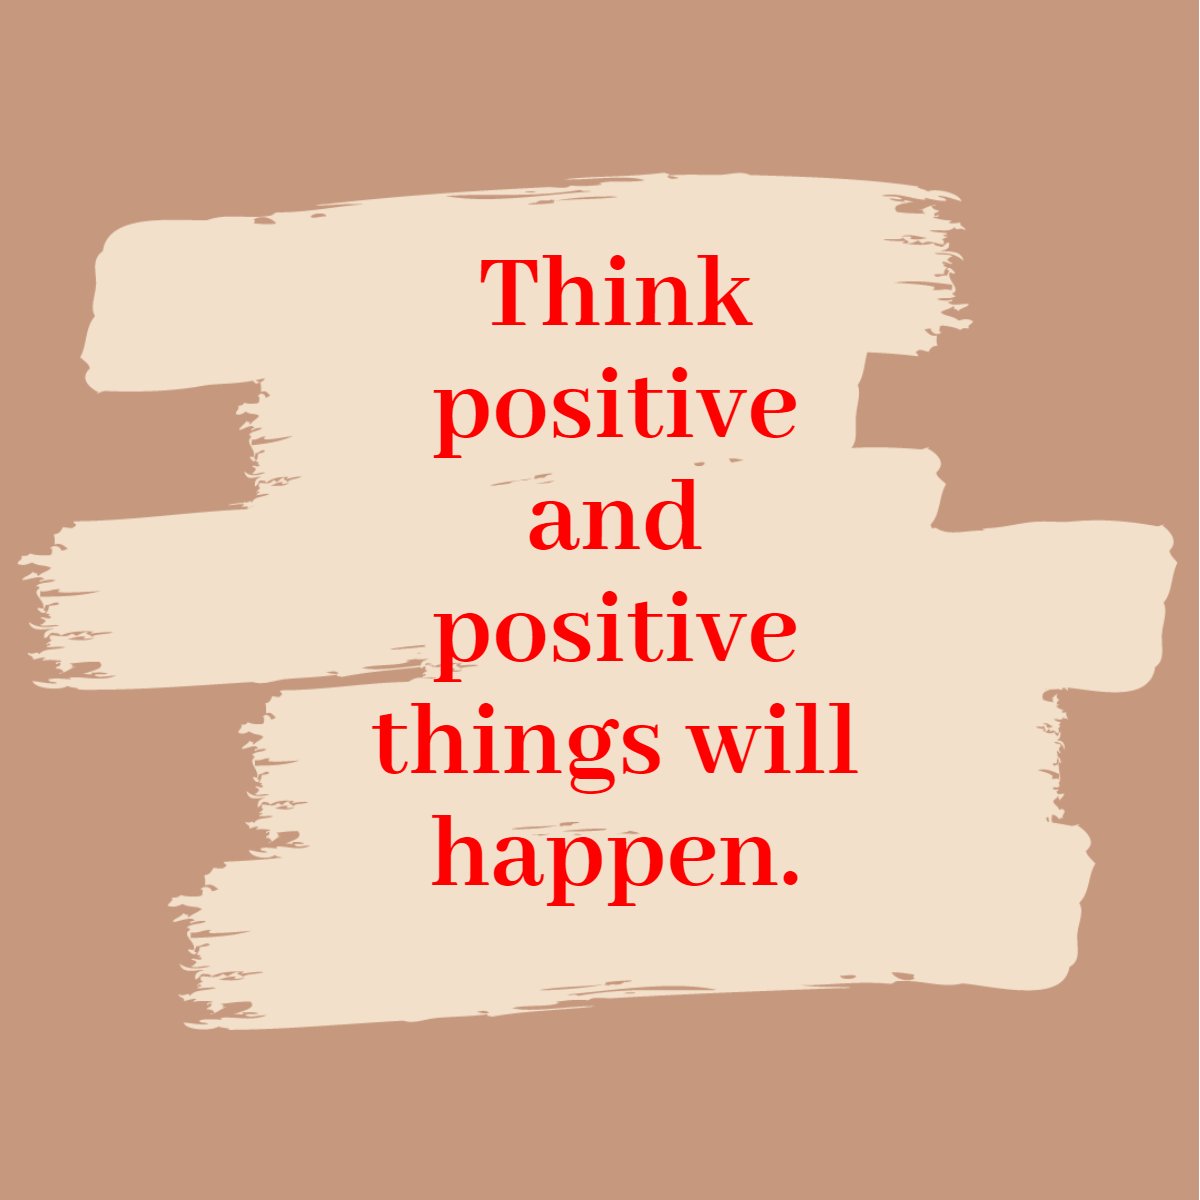 Matt Kemp - When you think positive, good things happen.

#positivethoughts #positivethoughtsonly #lawofpositivism #positivism #positiveaffirmationsthoughts
 #dreamhome #homeowner #goals #homegoals #indianagoldgroup #indy #hometips #letstalk #indiana #indianarealestate